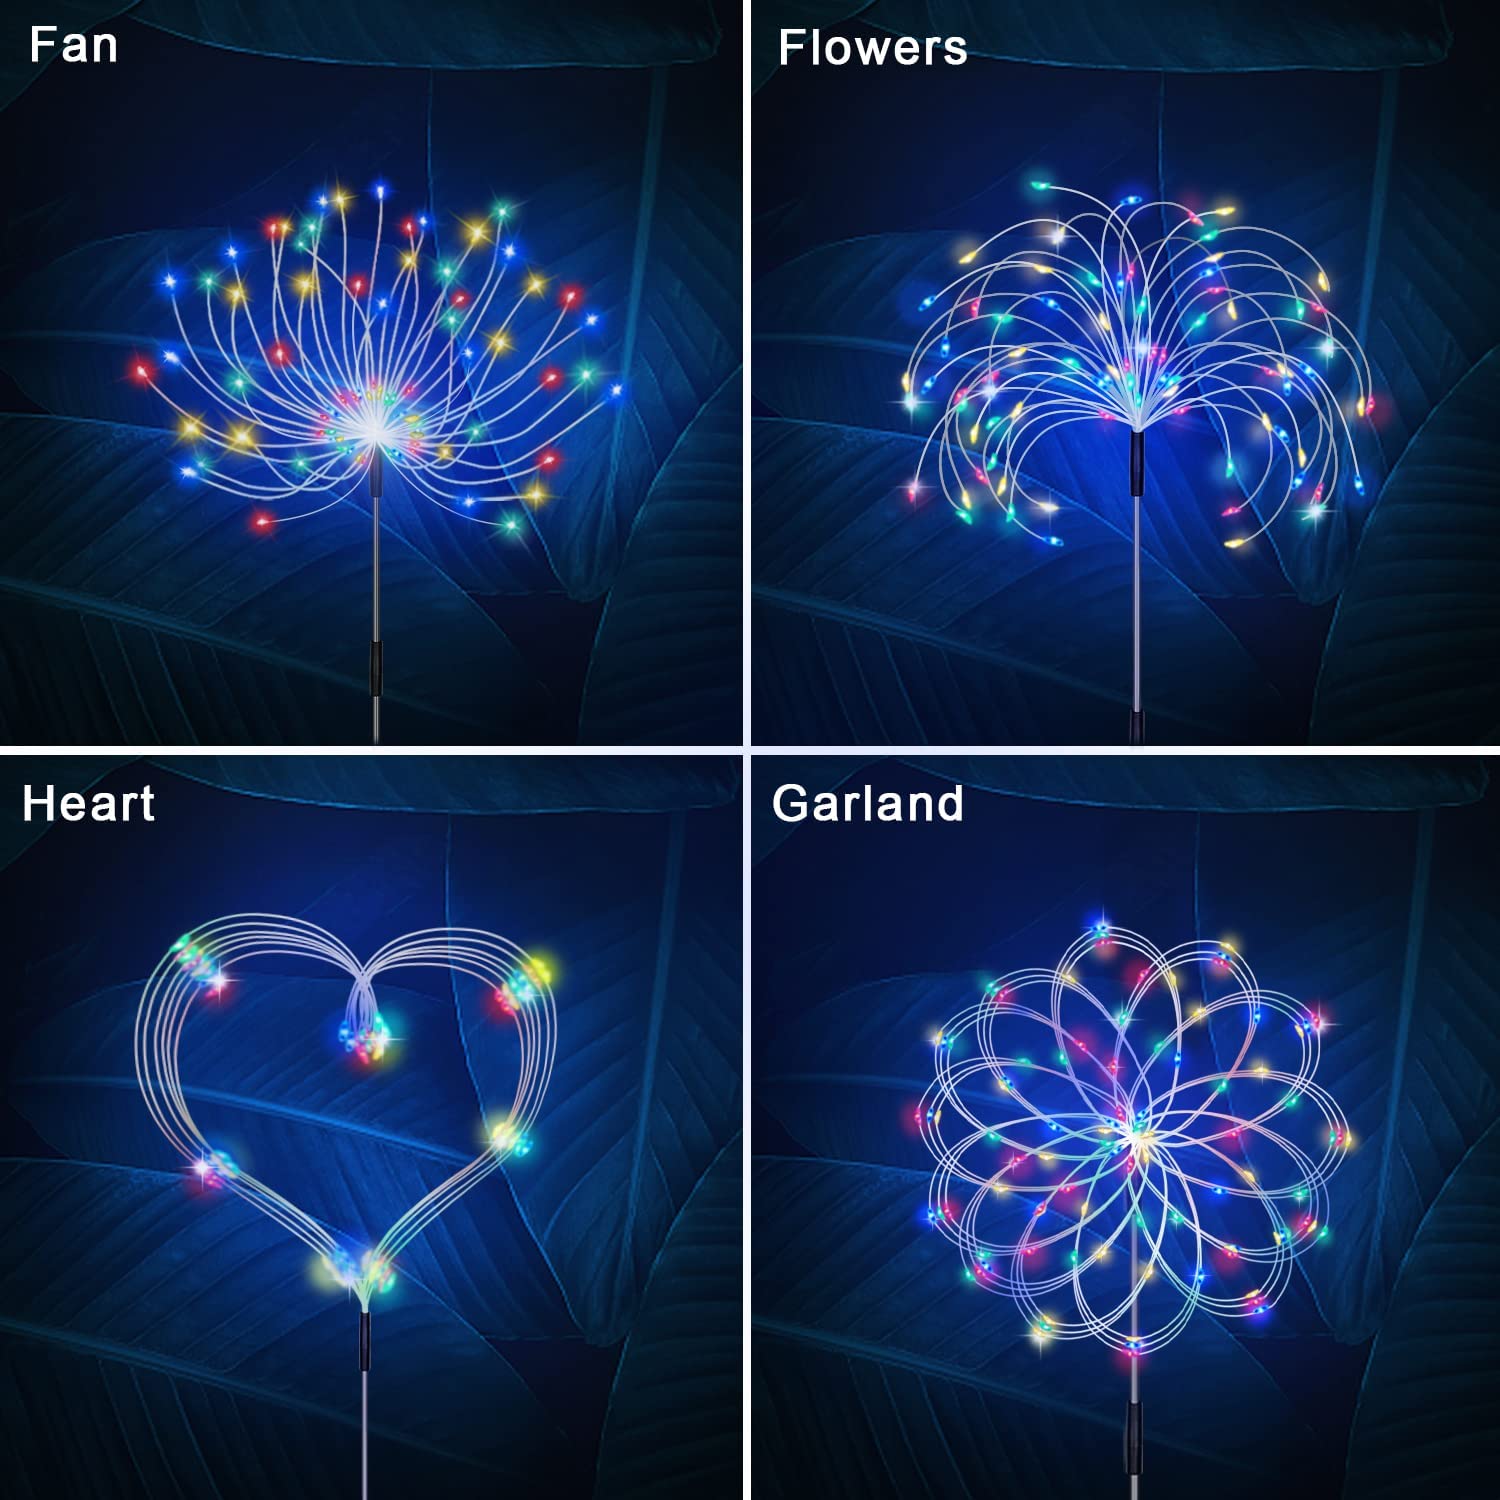 Solar Firework Lights, Garden Lights Pack 120 LED Remote Control Solar  Decorative Lights, Waterproof Stake Landscape Lights with Flashing Modes, for  Garden Pathway Courtyards Decor